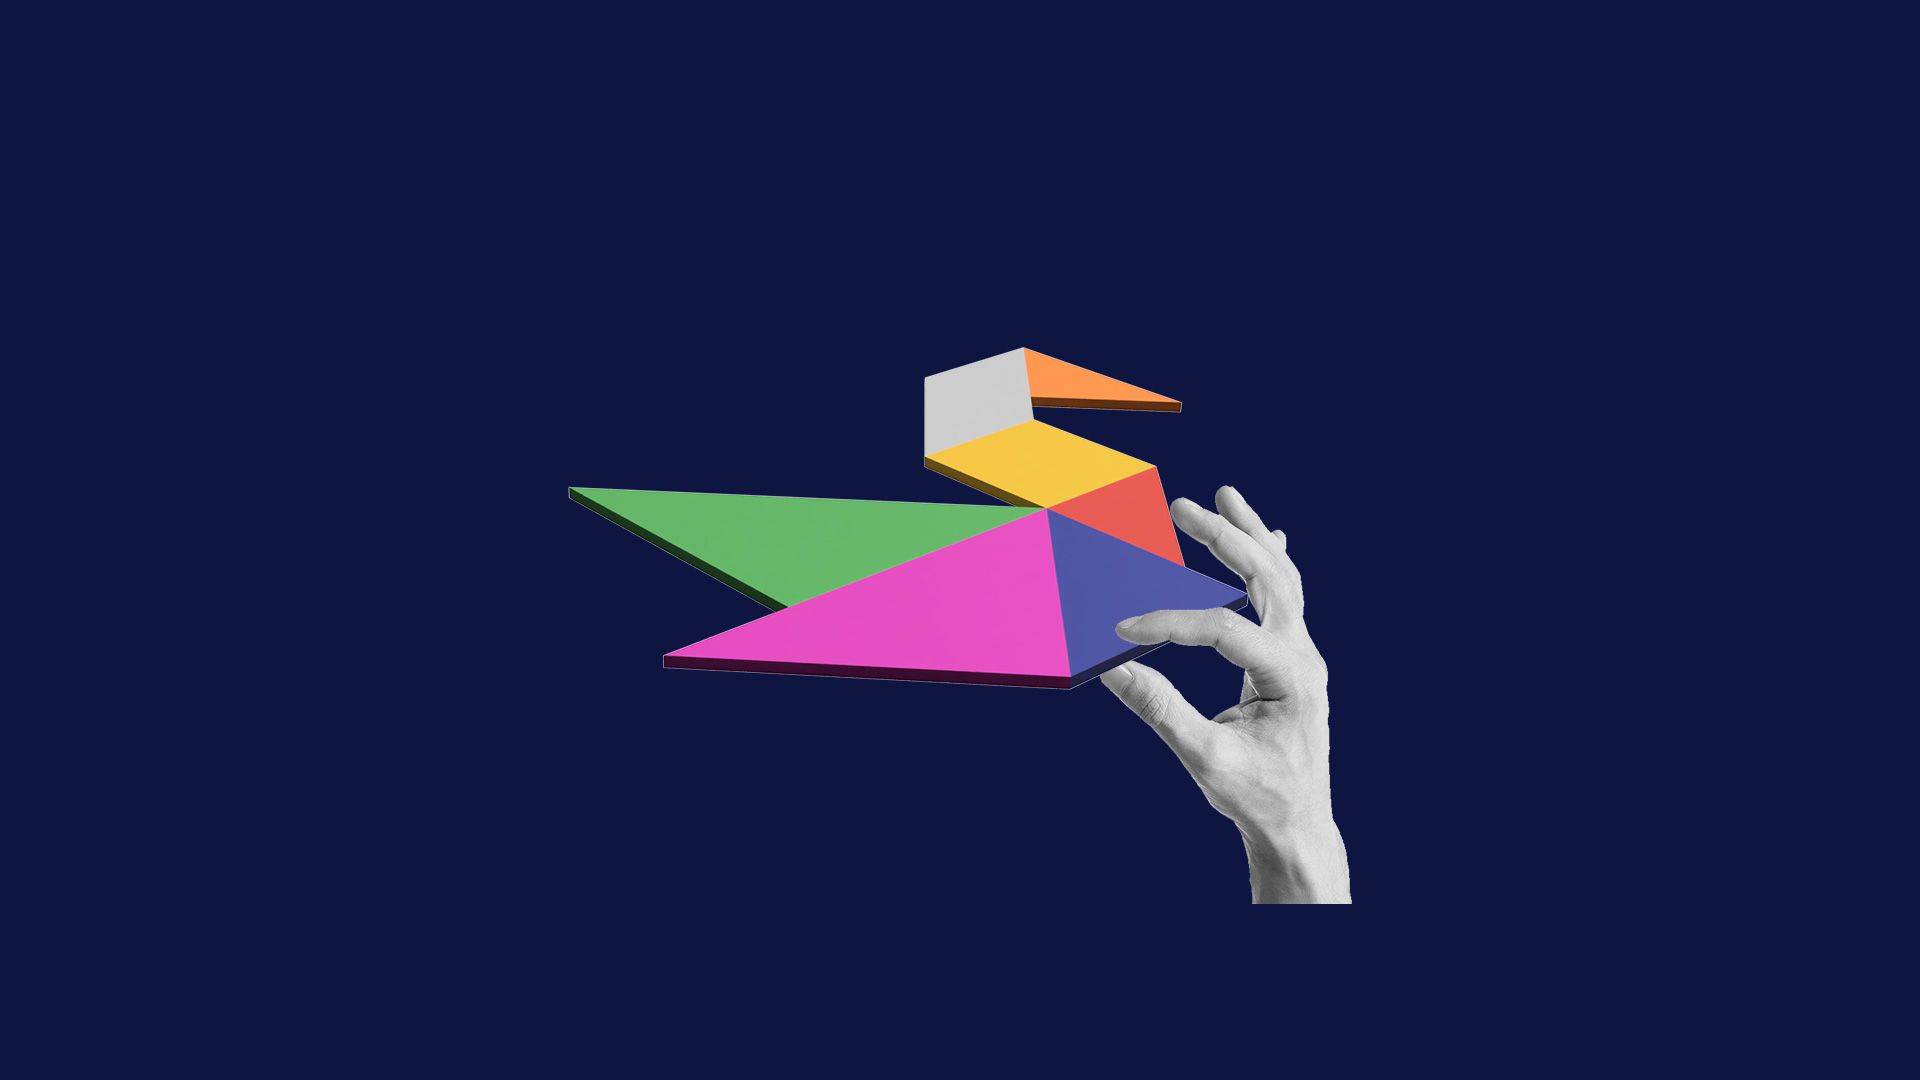 Hand holding a multi-coloured tactile tangram puzzle.